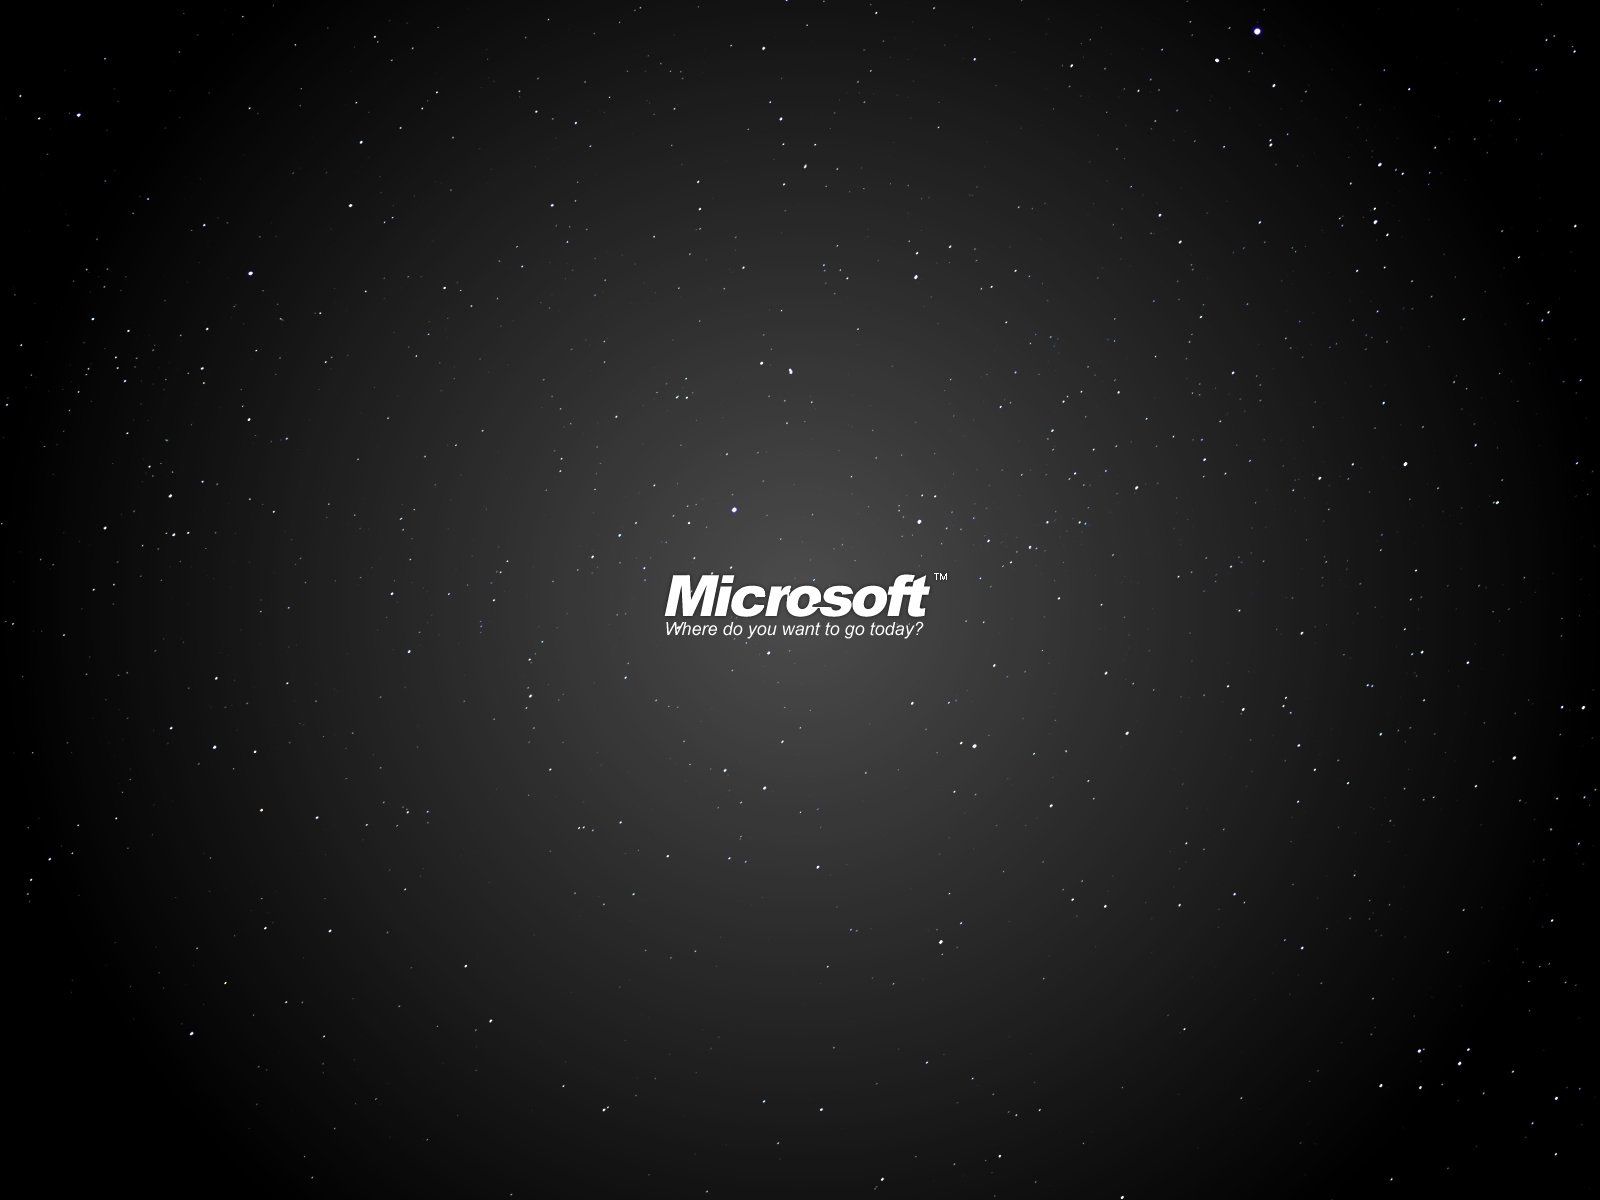 Download Microsoft Desktop Wallpaper pictures in high definition 1600x1200